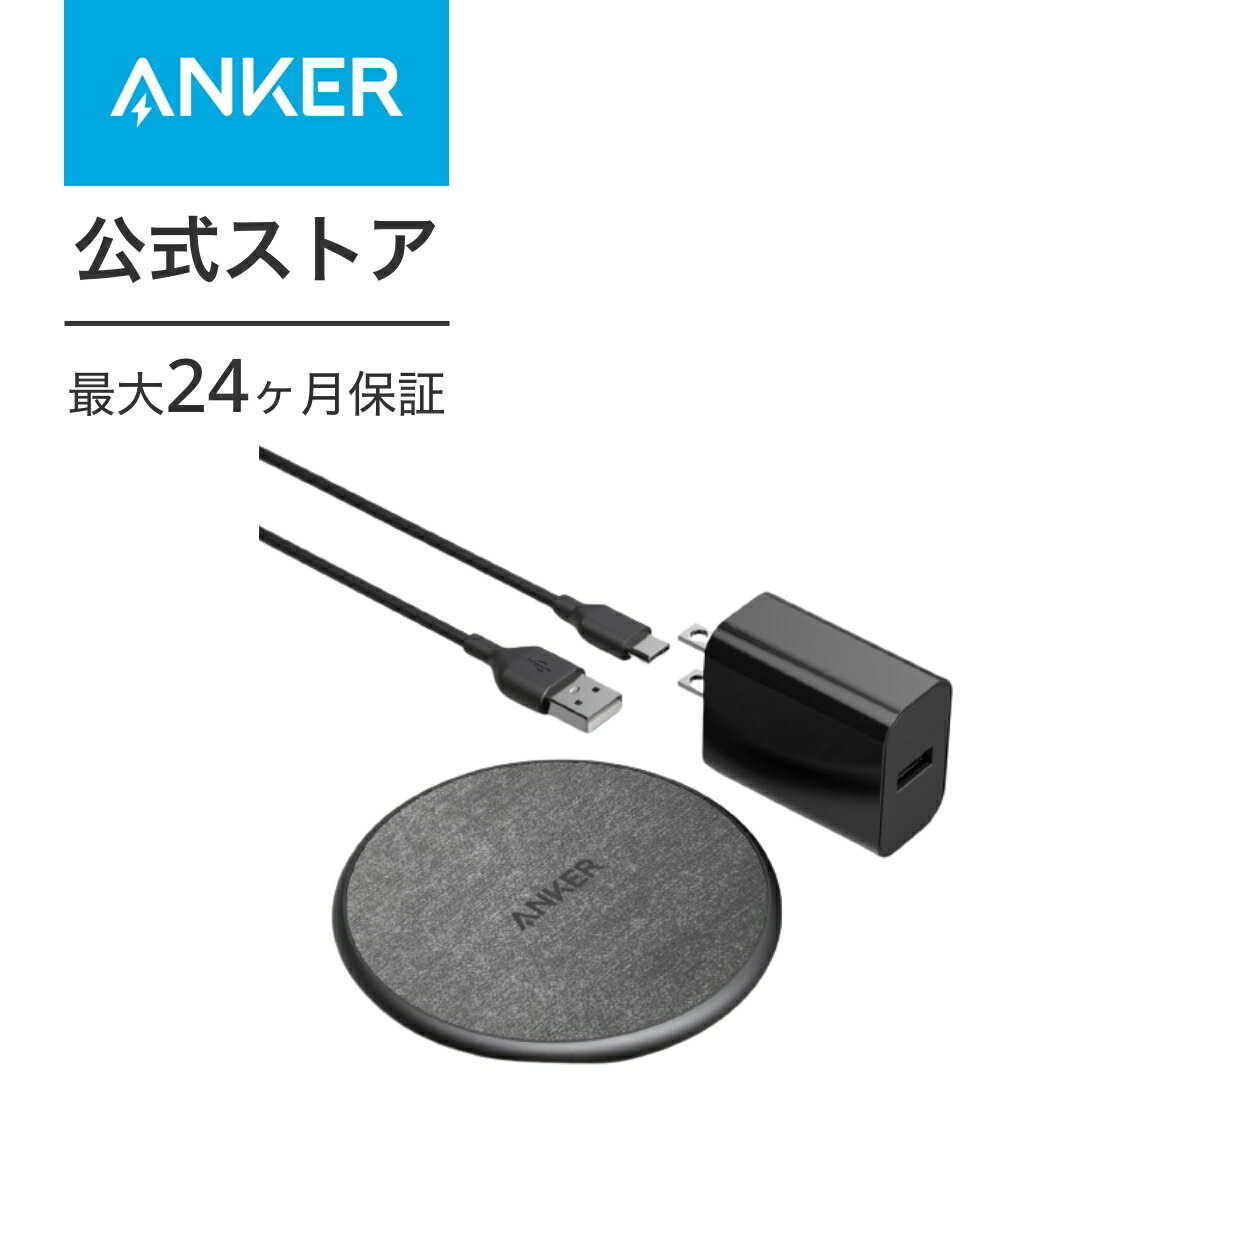 Anker 318 Wireless Charger (Pad) (ワイヤレス充電器 Qi認証) iPhone 14/ 13 Galaxy 各種対応 最大10W出力 USB-C USB-A ケーブル同梱 type-c入力対応